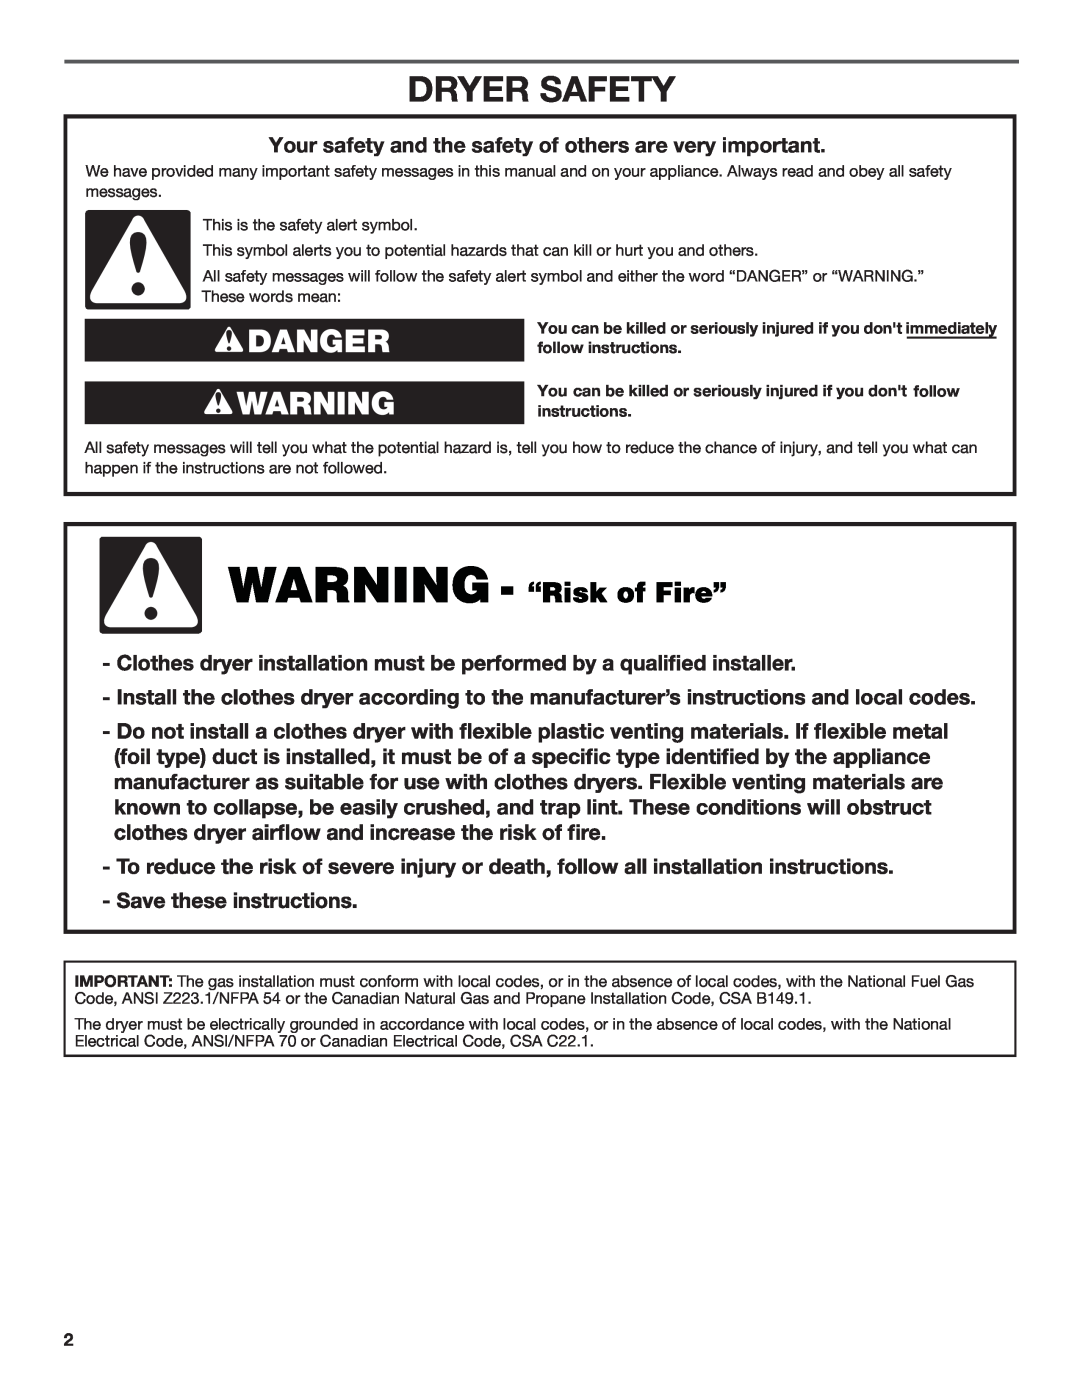 Maytag MGDX600XW, W10097000A-SP, W10096984A installation instructions Dryer Safety, Danger Warning 